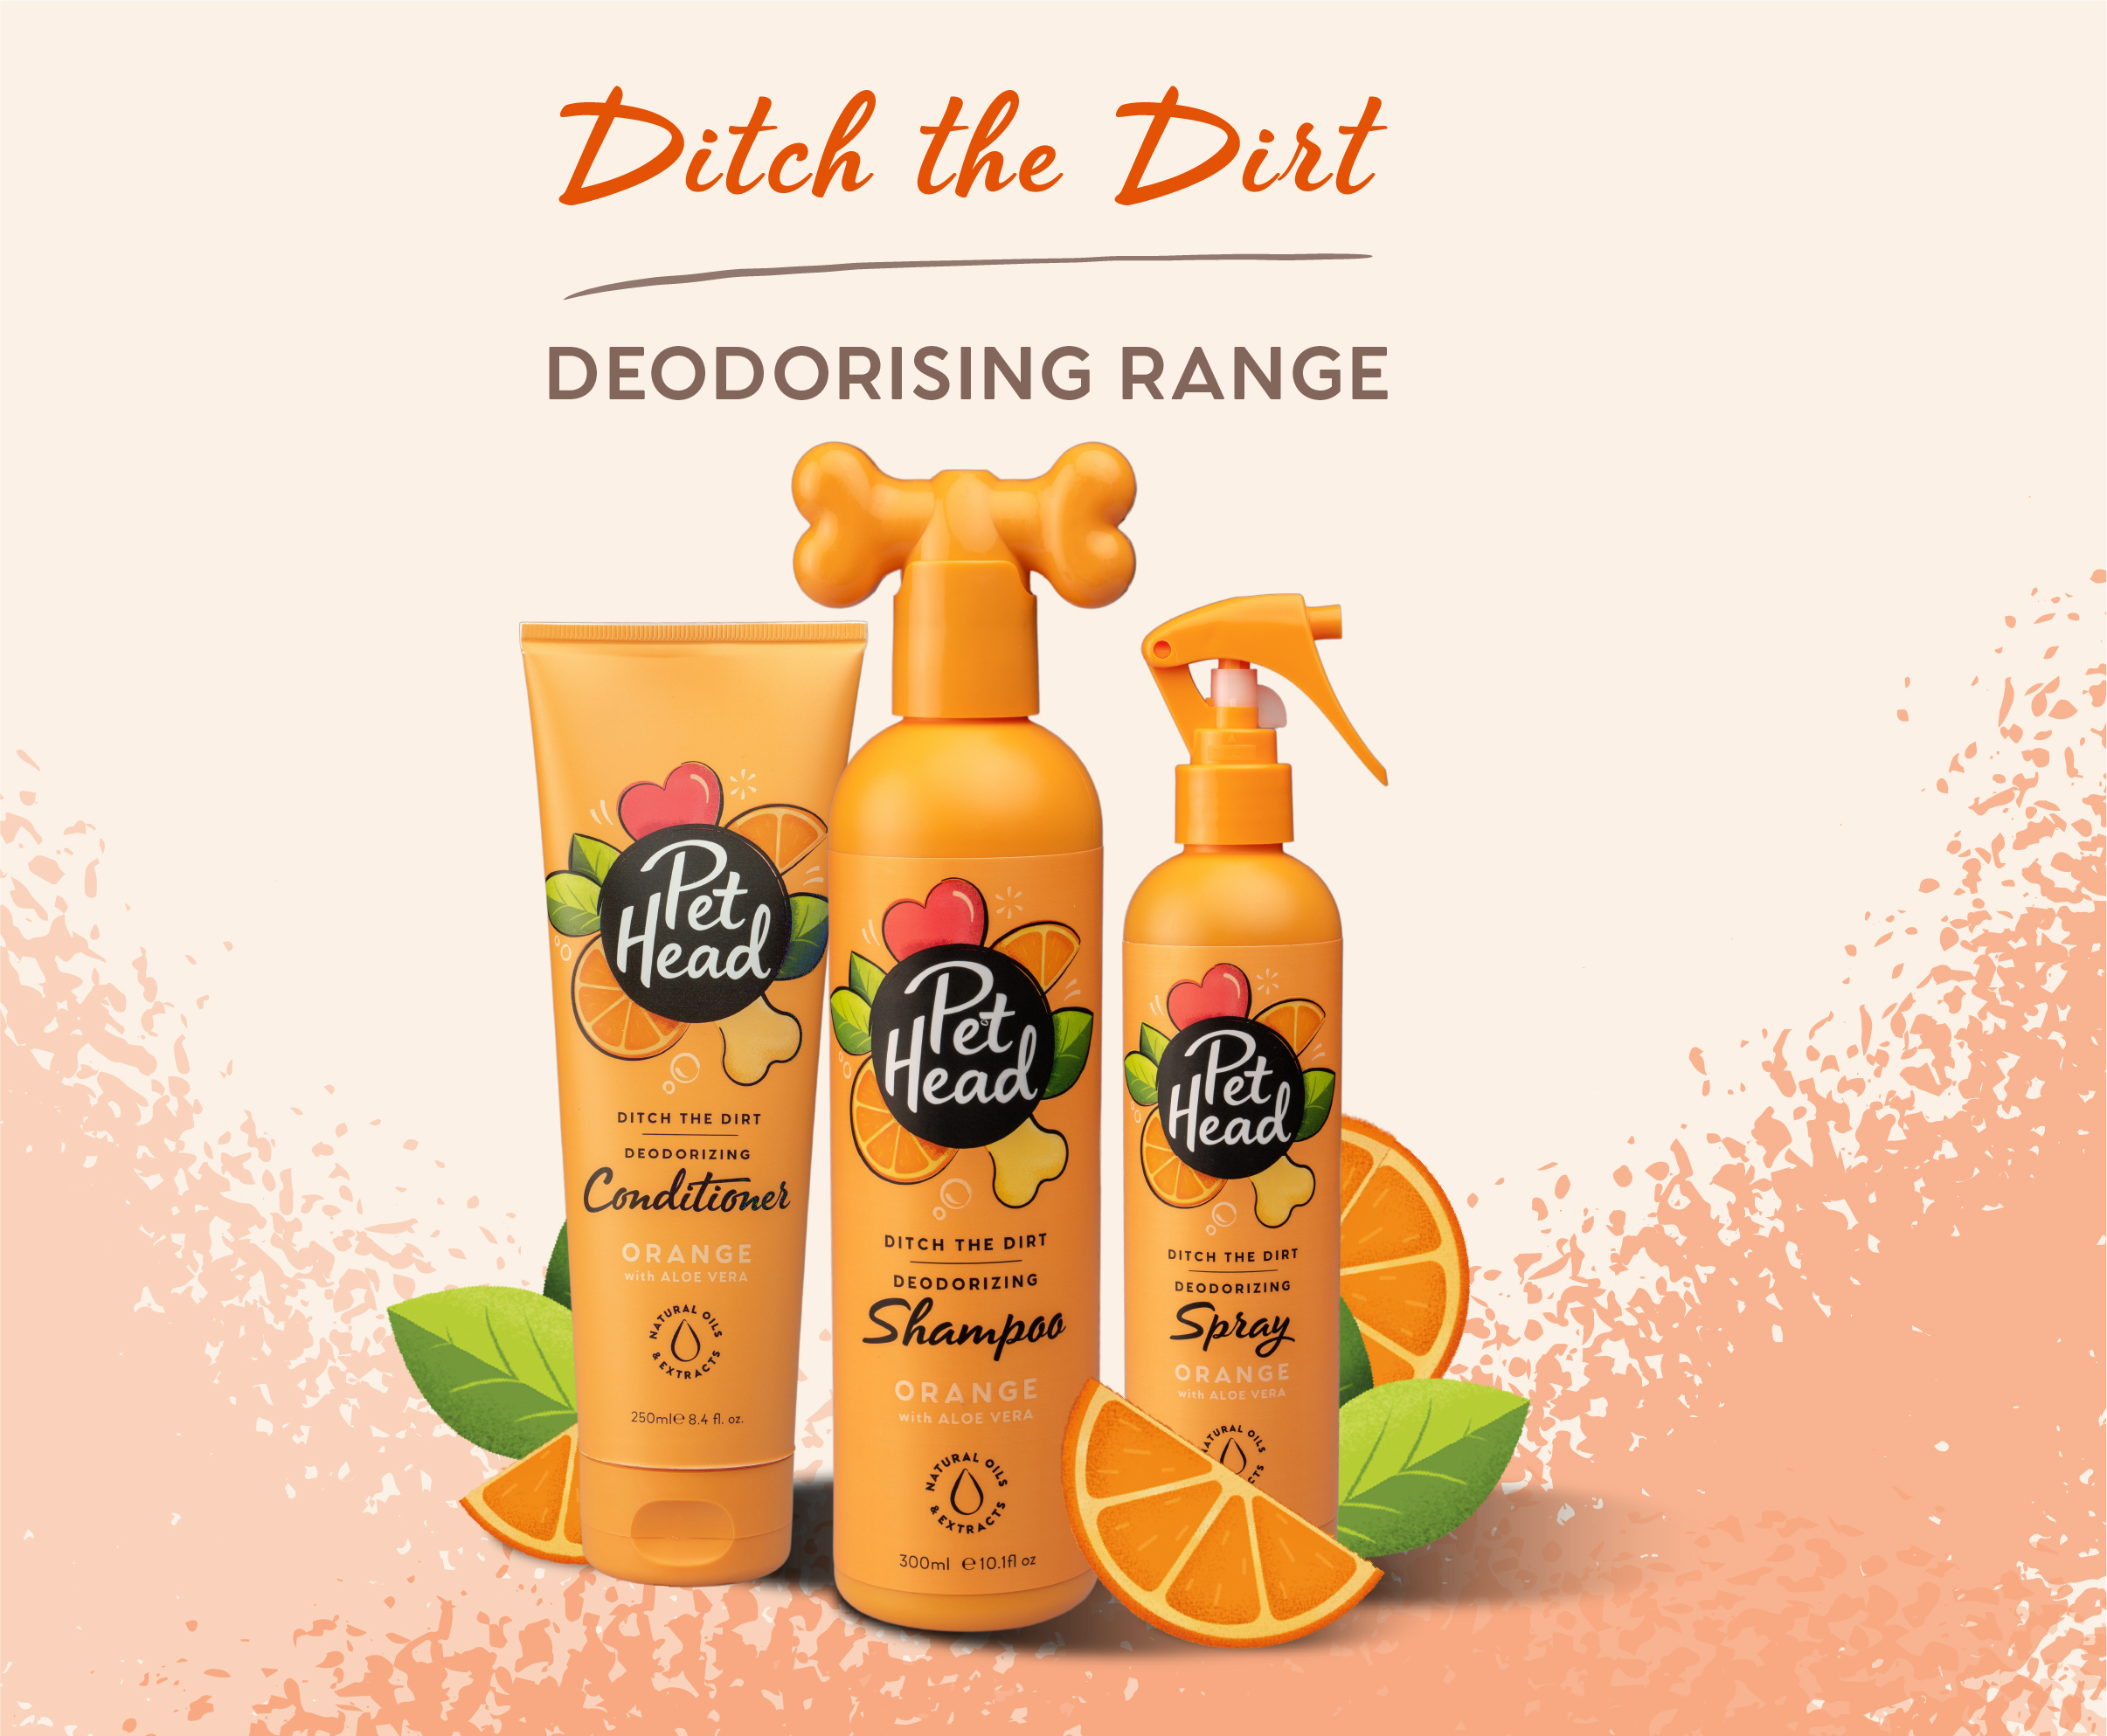 Ditch the Dirt dog conditioner